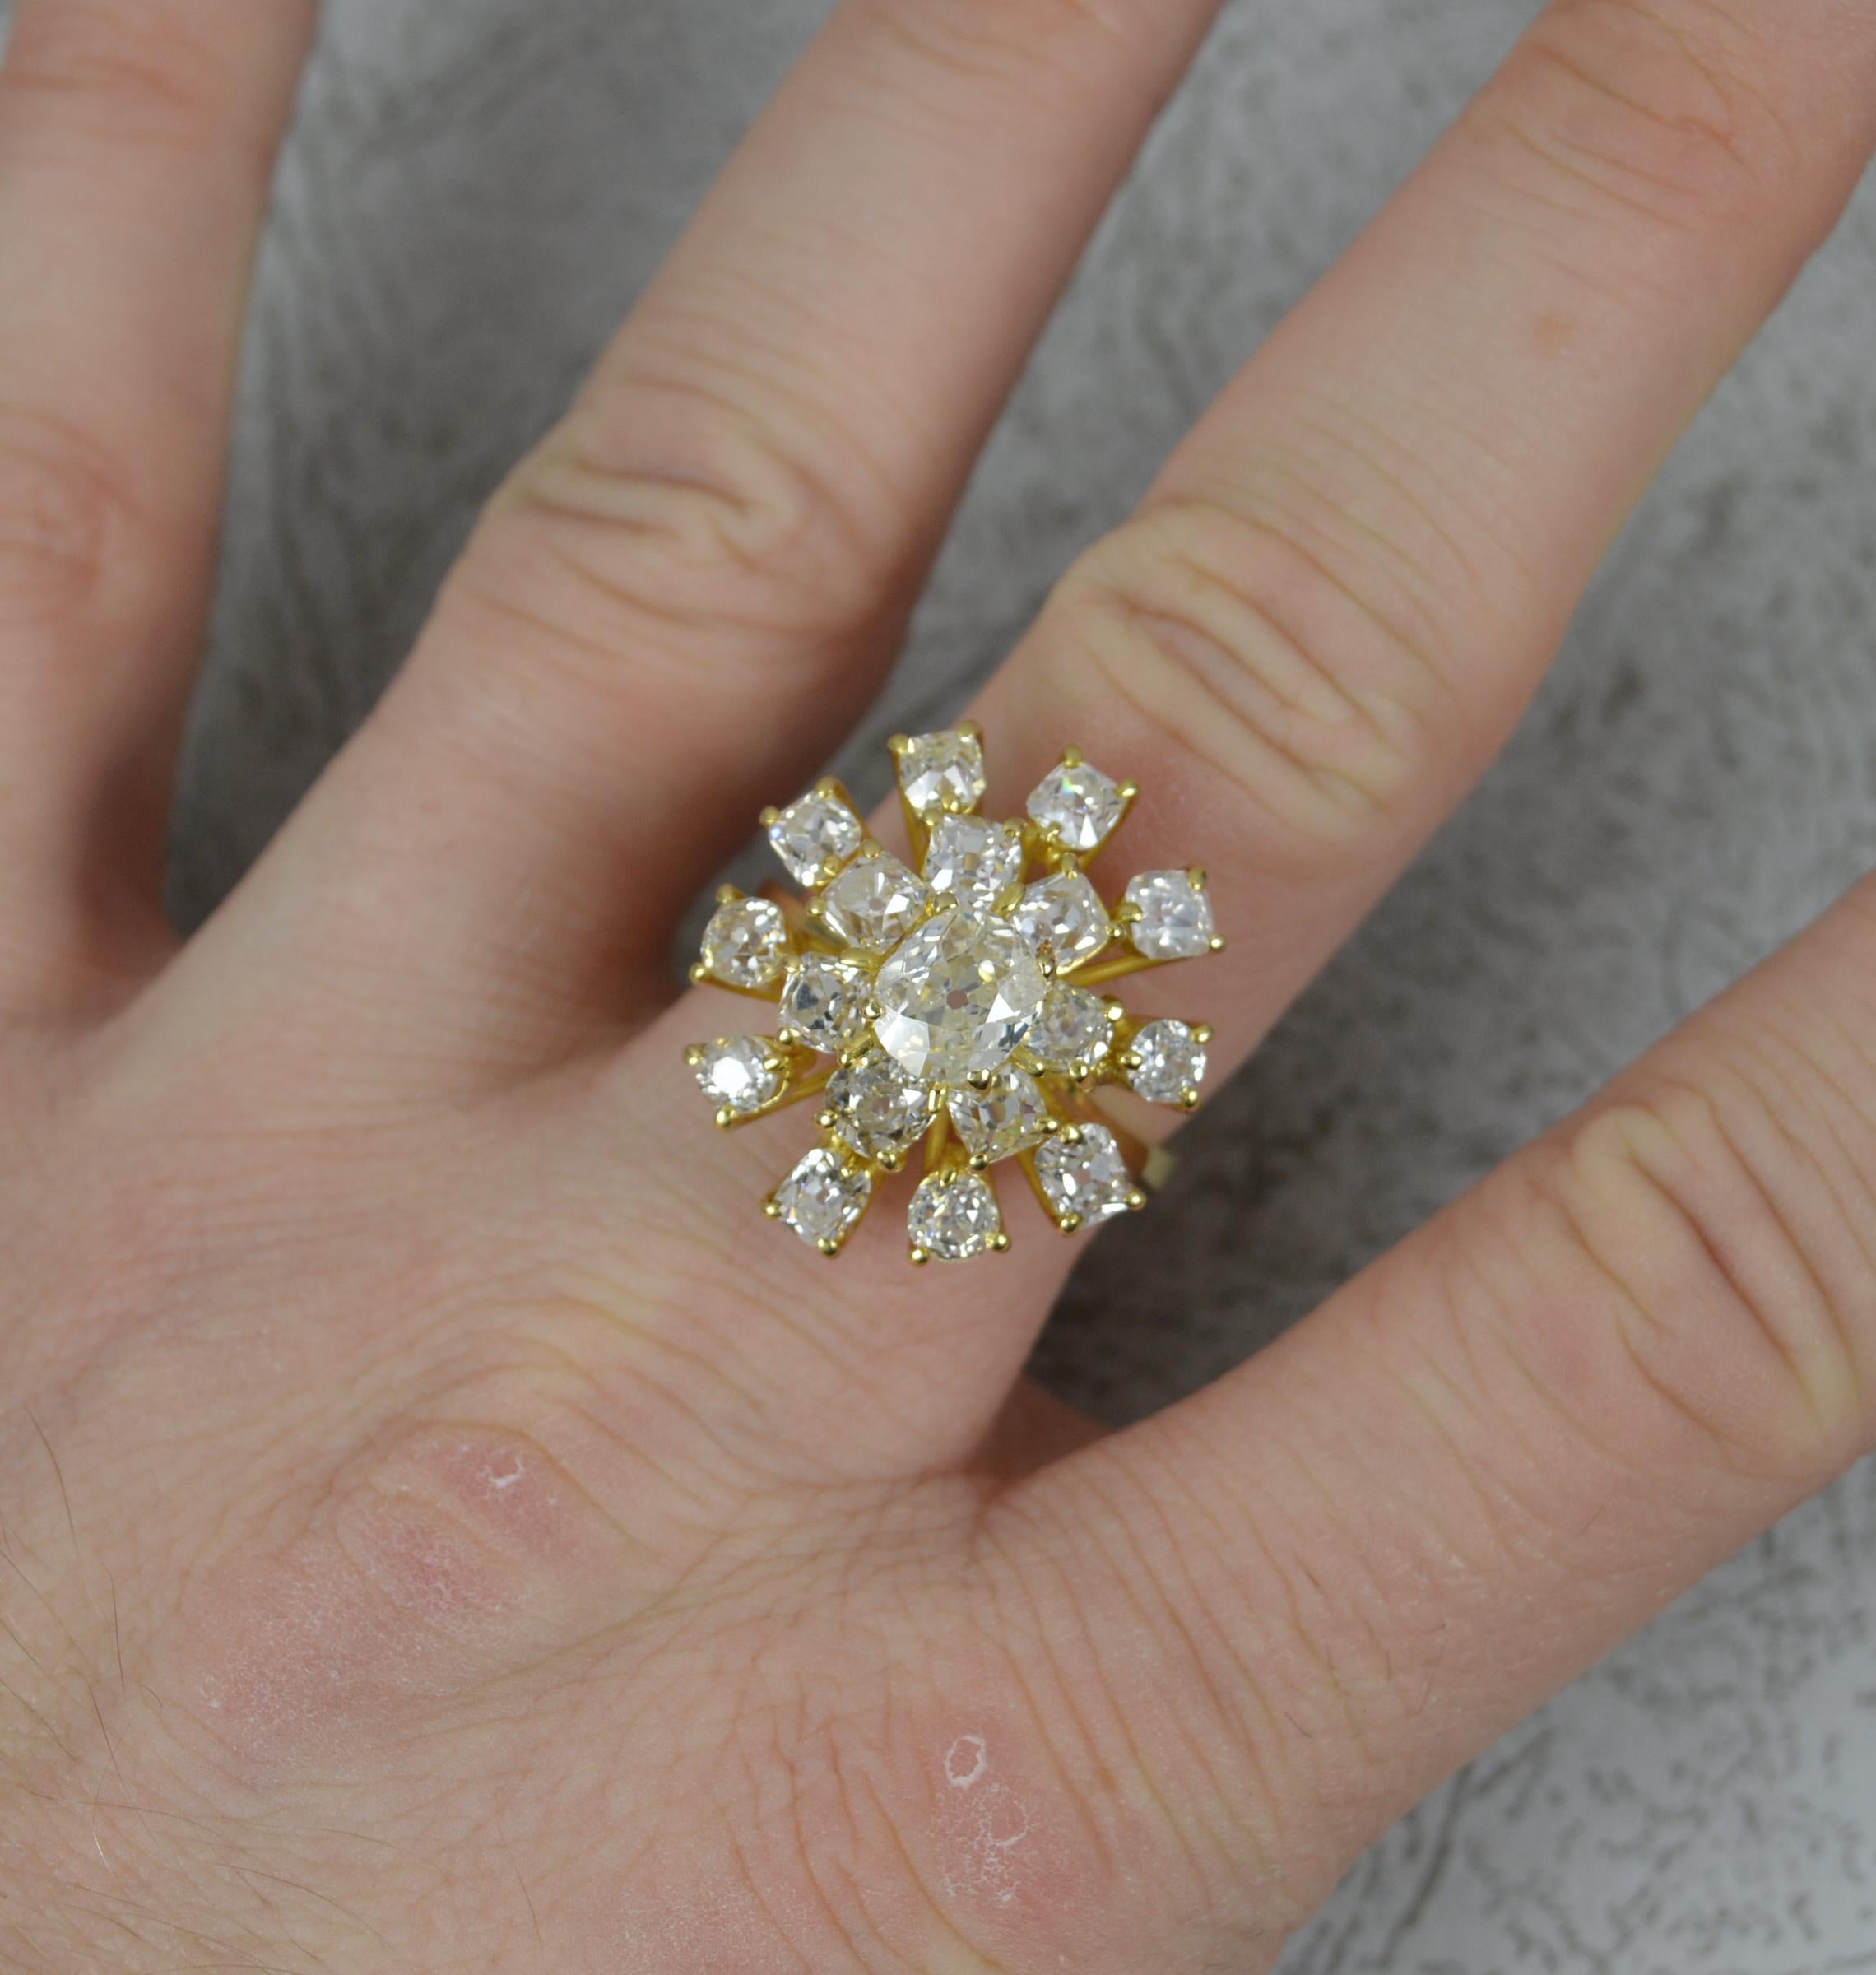 A stunning 18ct Gold and Diamond ring.
Solid 18 carat yellow gold shank and claw setting.
Designed with old mine and European cut diamonds. To the centre, 5.9mm x 6.7mm approx 1 carat. Surrounding are two tiers of additional diamonds to total 3.5